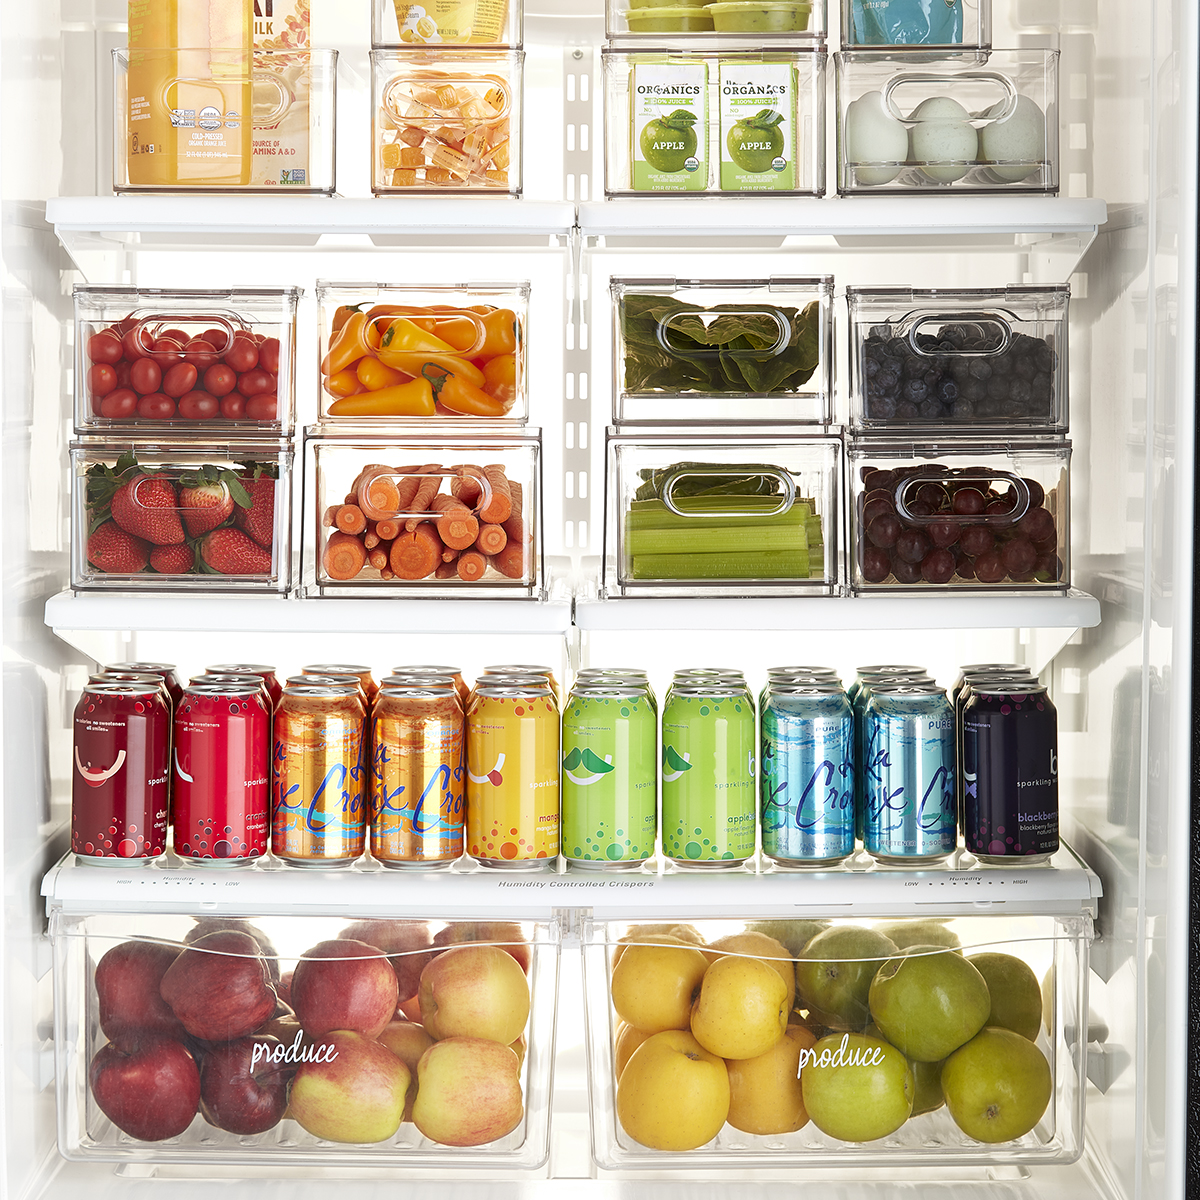 https://www.containerstore.com/catalogimages/389169/SU_20_THE-Inside-Fridge_RGB.jpg